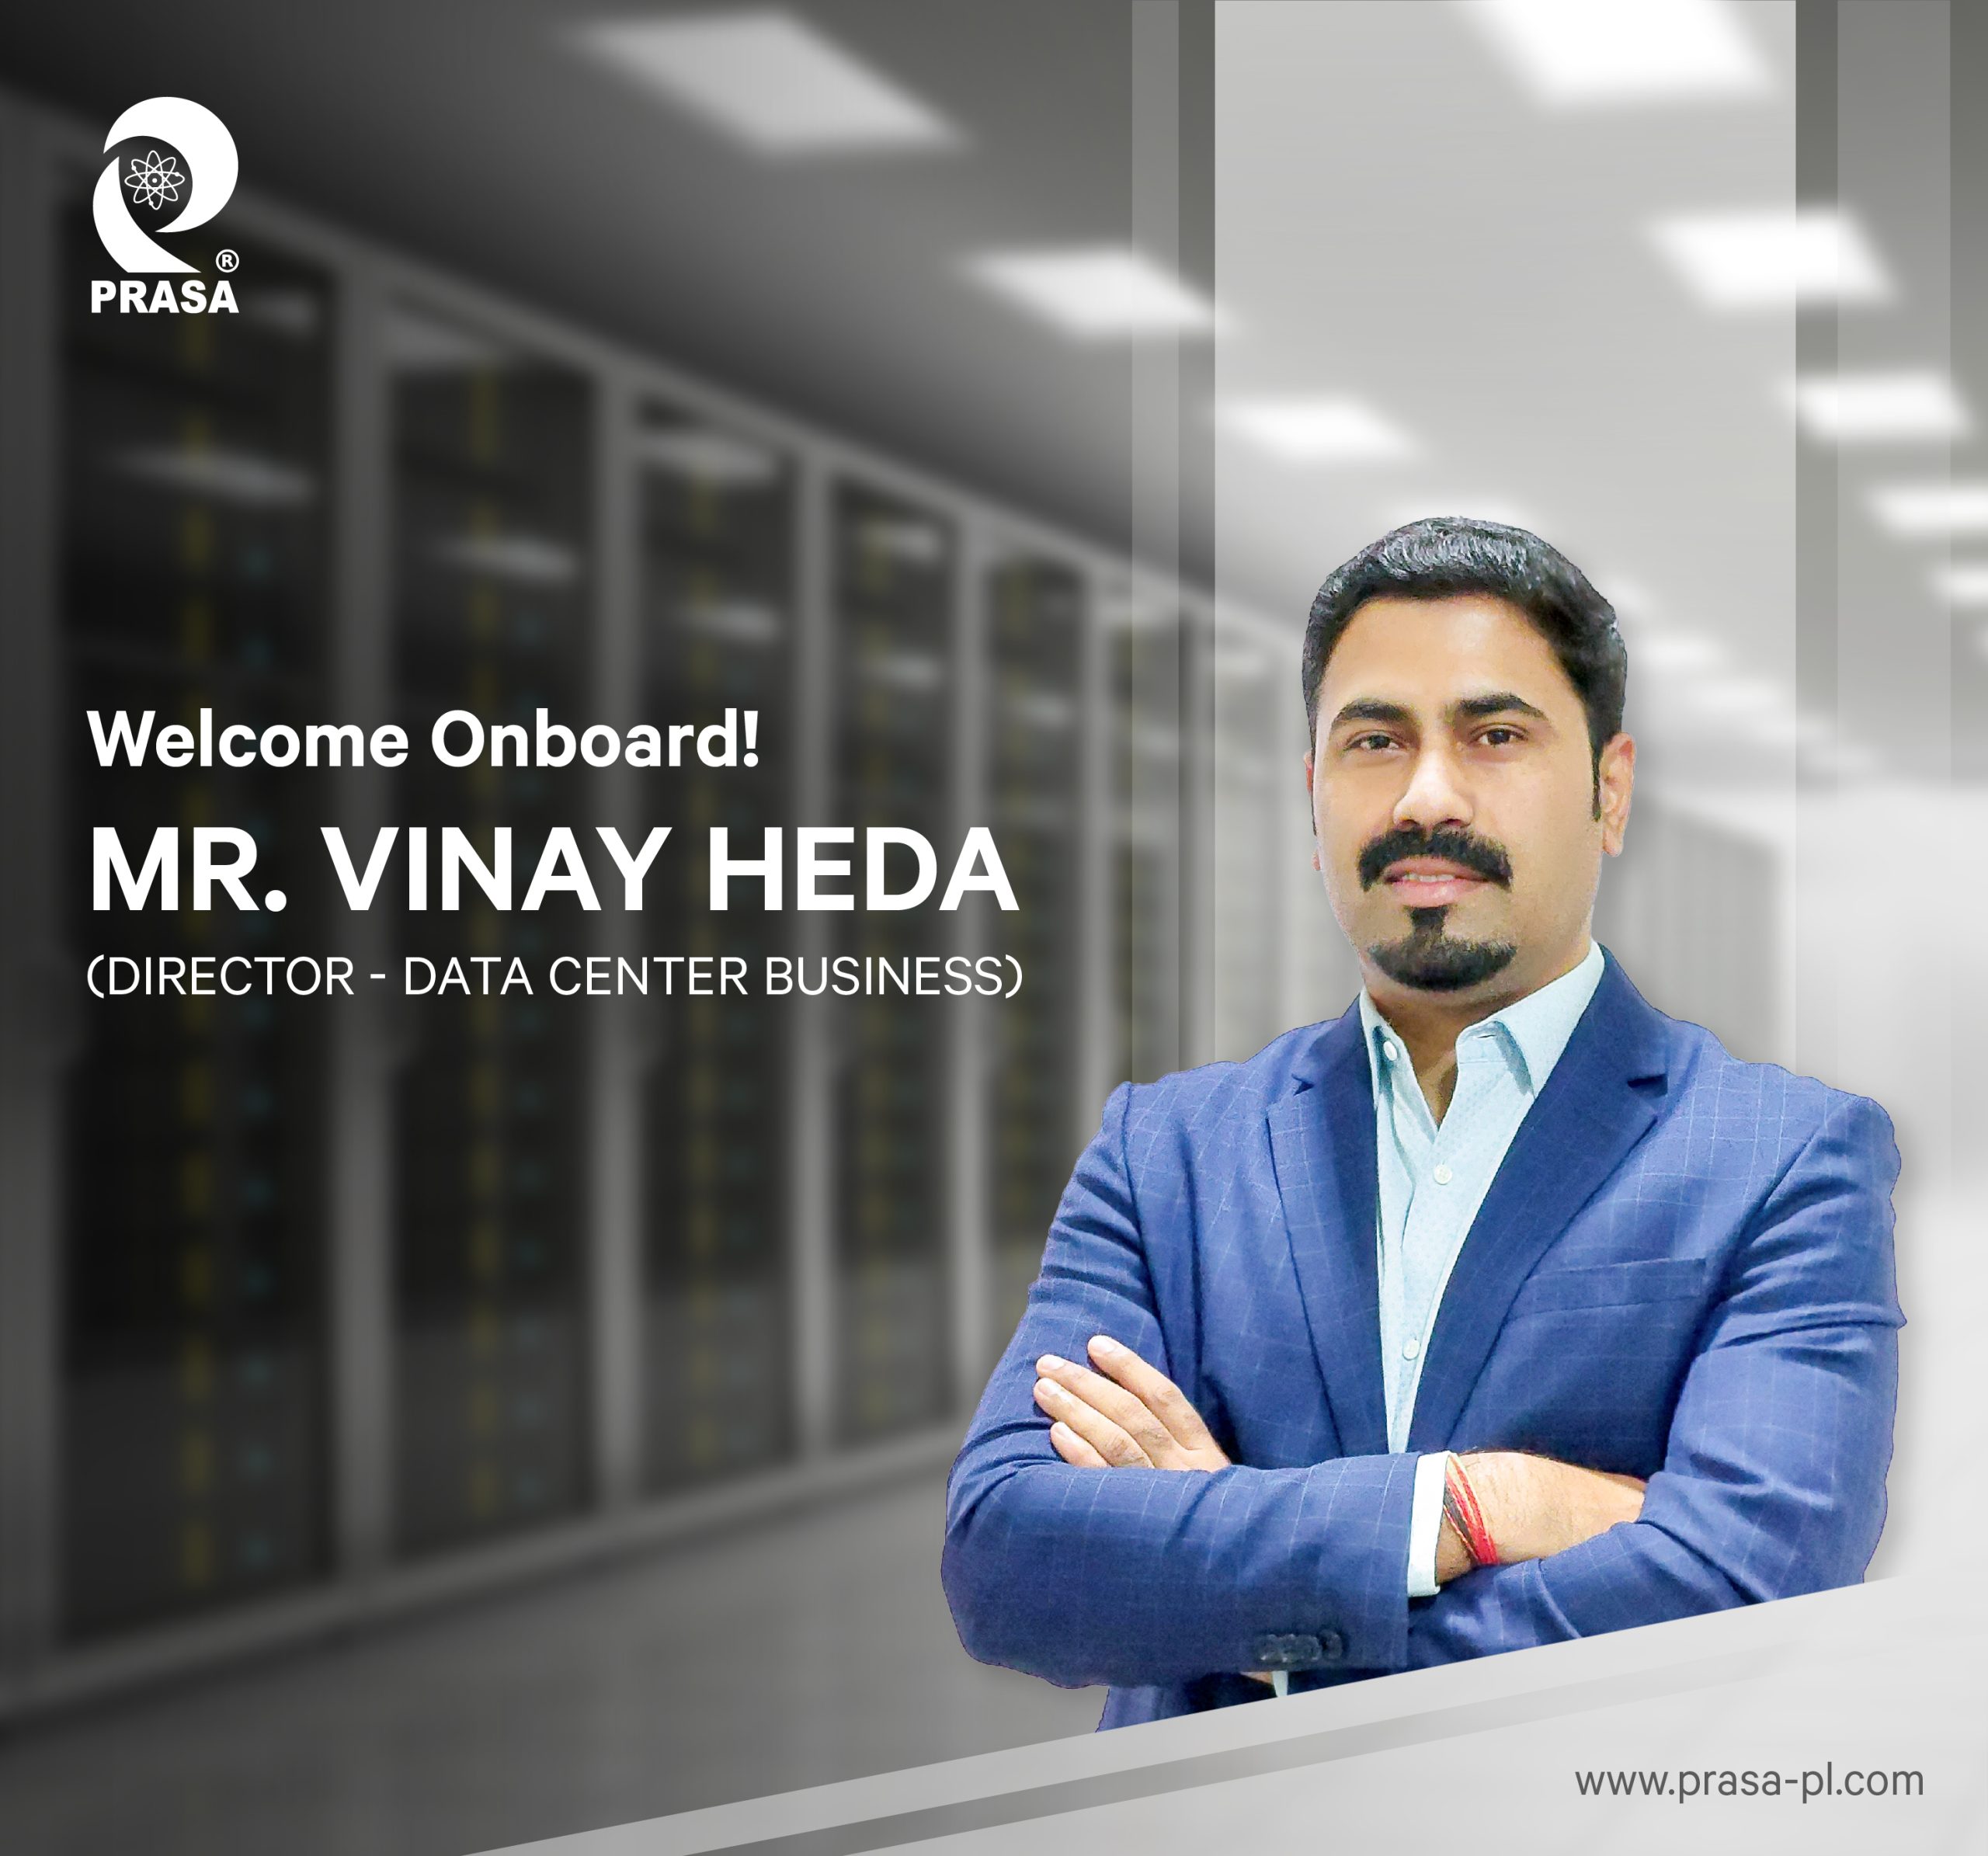 PRASA is Pleased to Announce the Onboarding of Mr. Vinay Heda